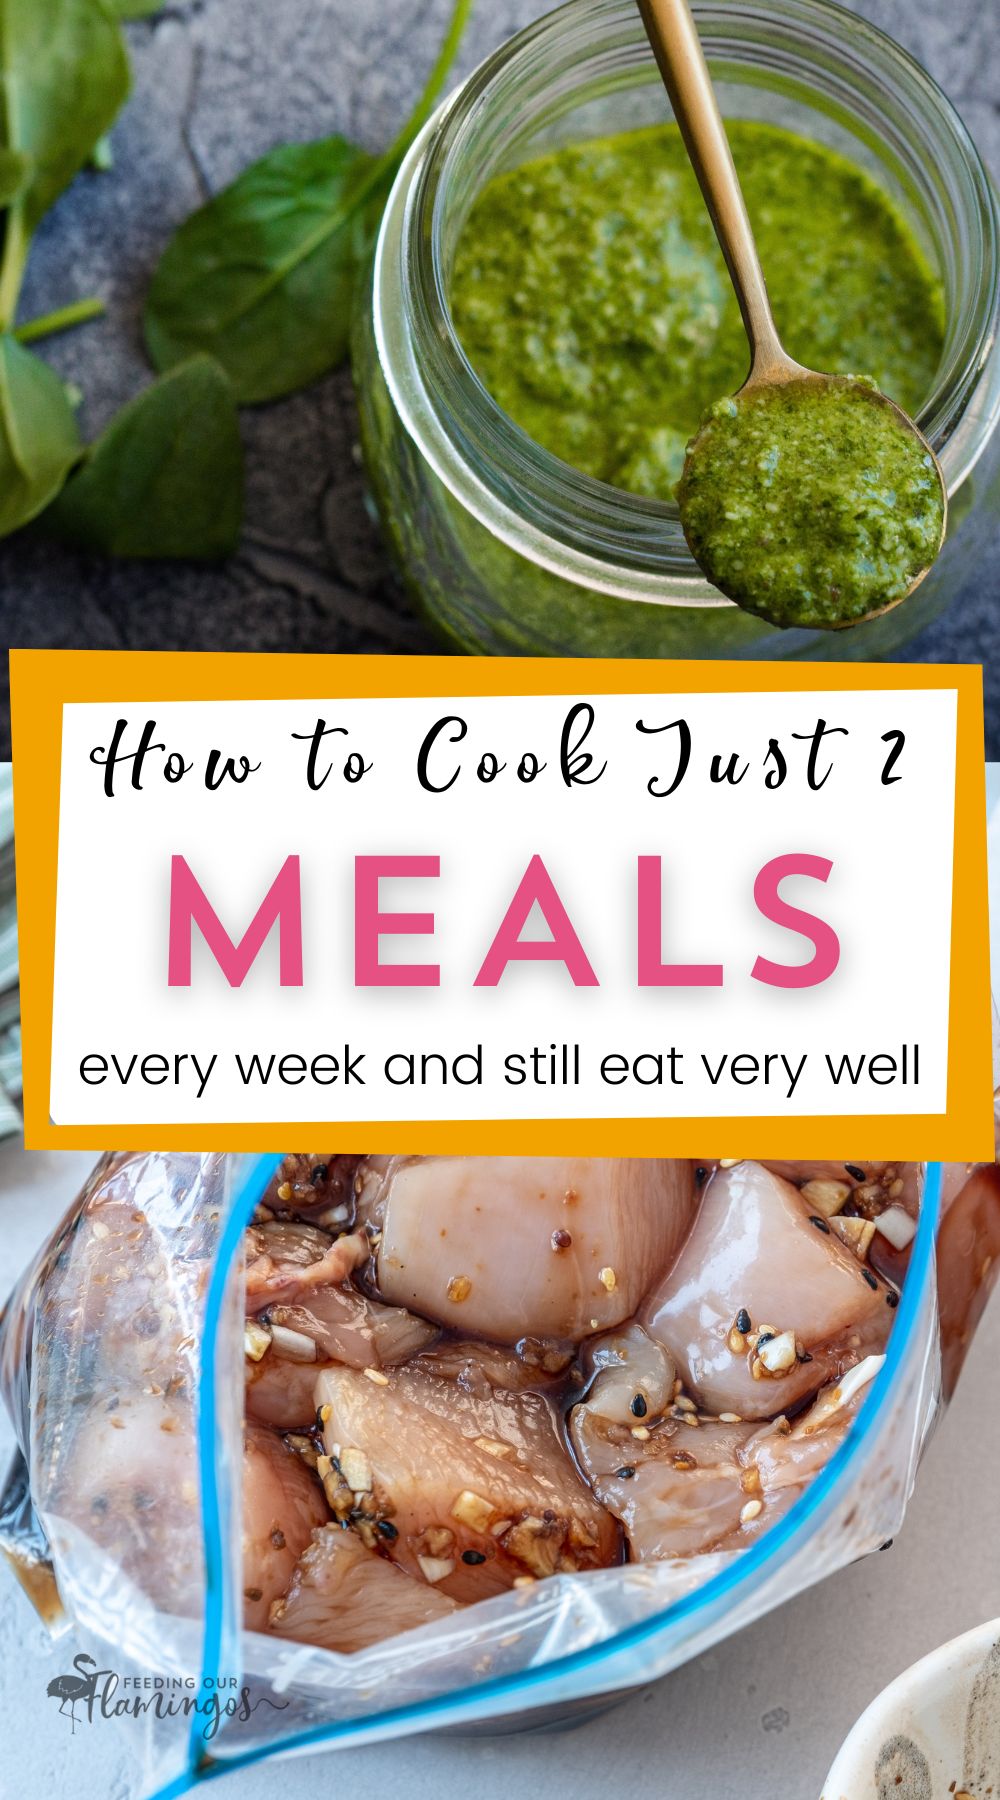 No time to cook every night of the week? Try cooking just twice a week and fill up your freezer in no time. You will beat the system and save tons of time and money in the process!